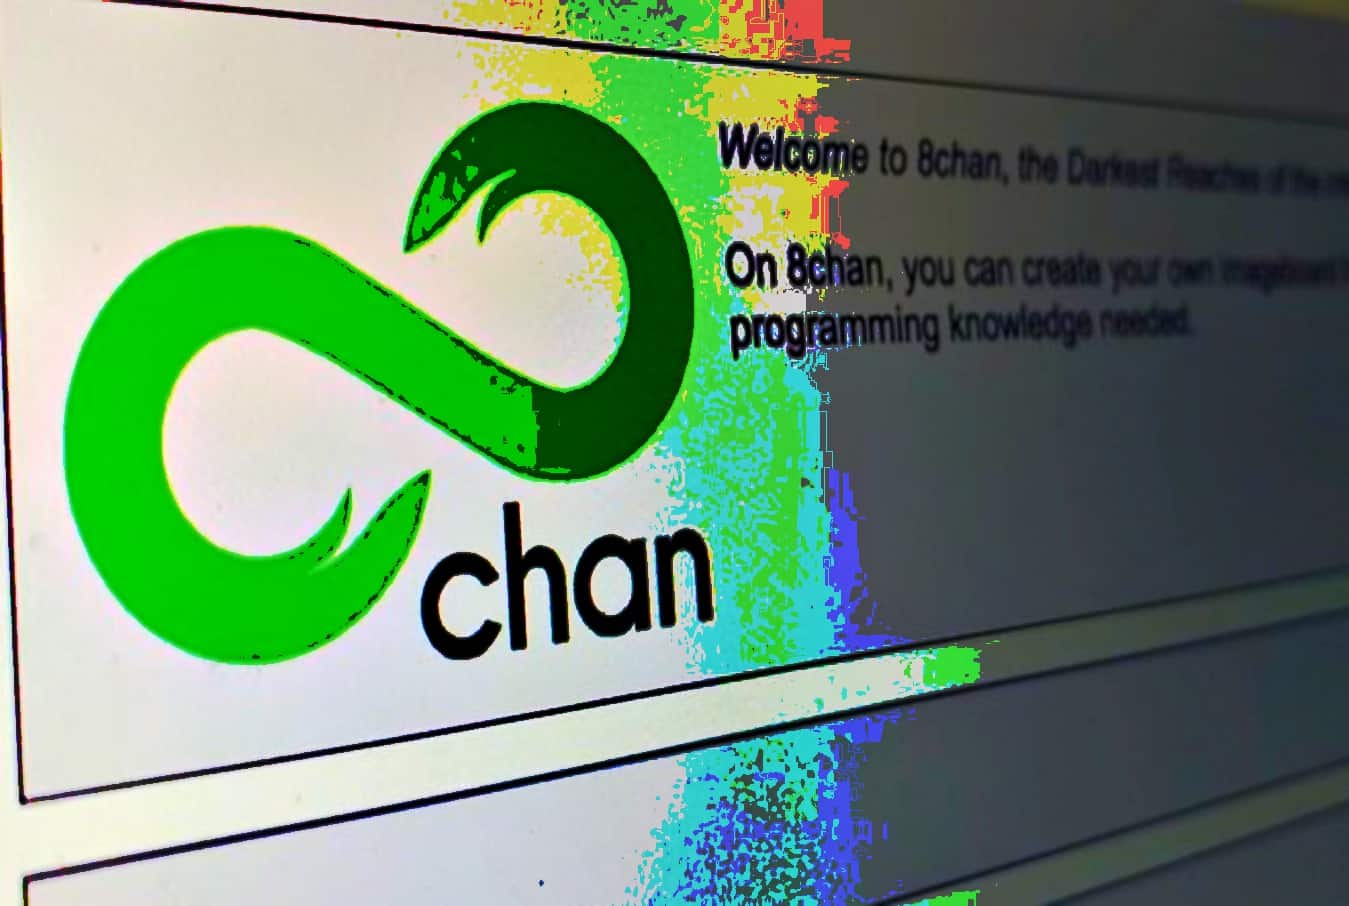 8chan goes down after Cloudflare & hosting firms boots it off